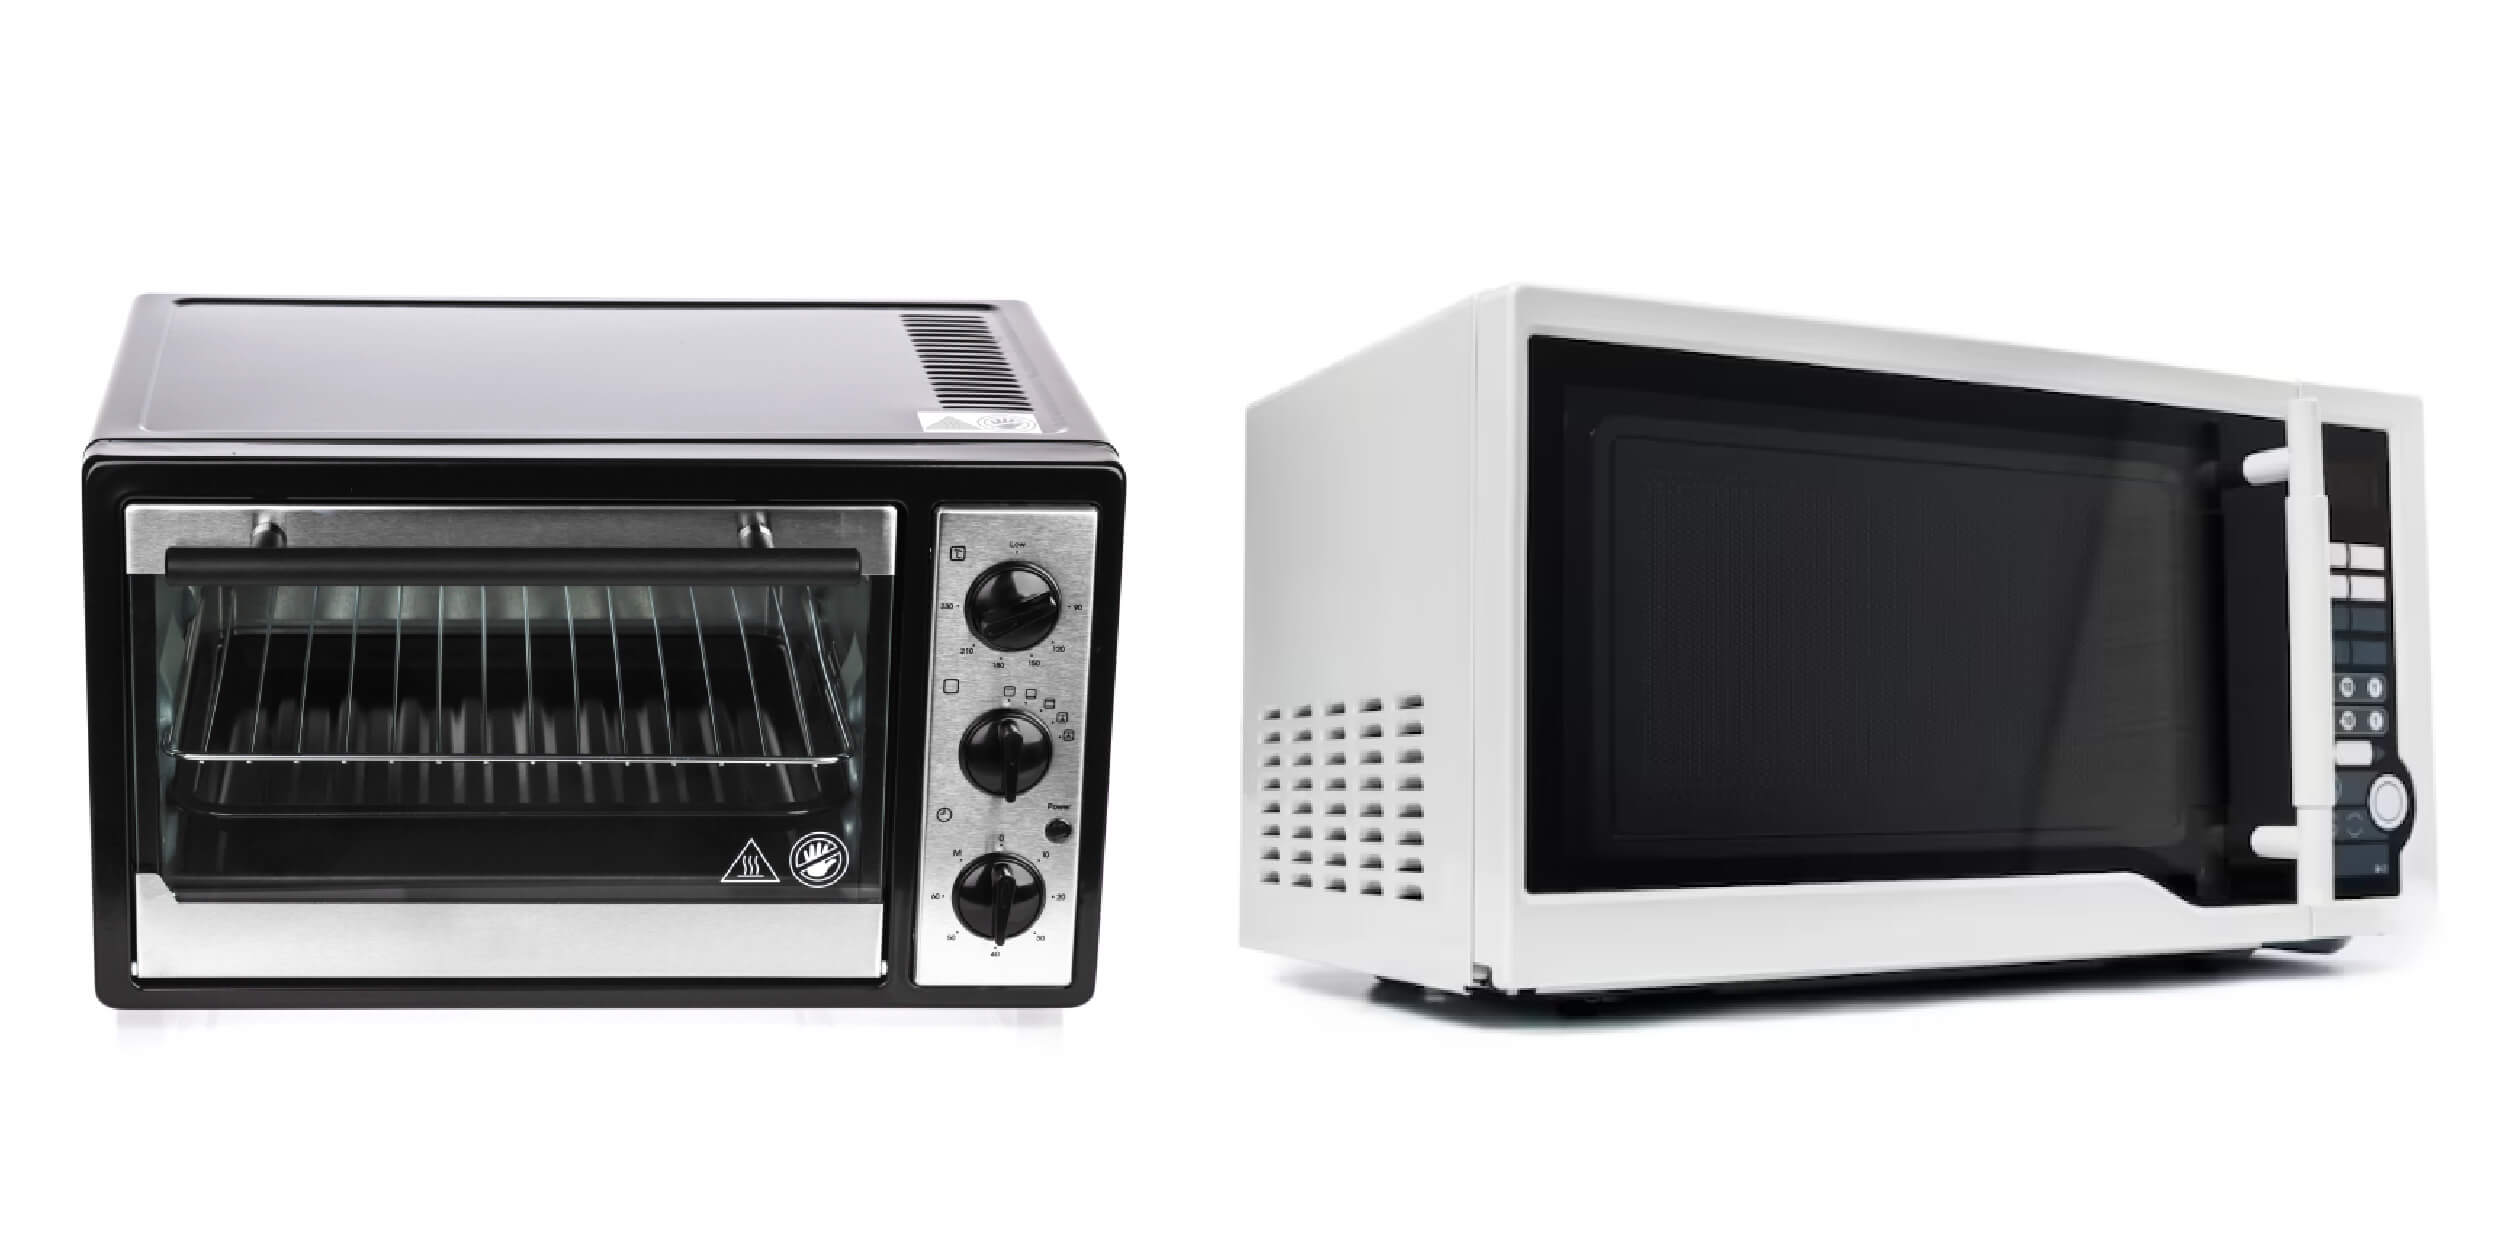 Toaster Oven vs Microwave: Choosing the Perfect Kitchen Appliance